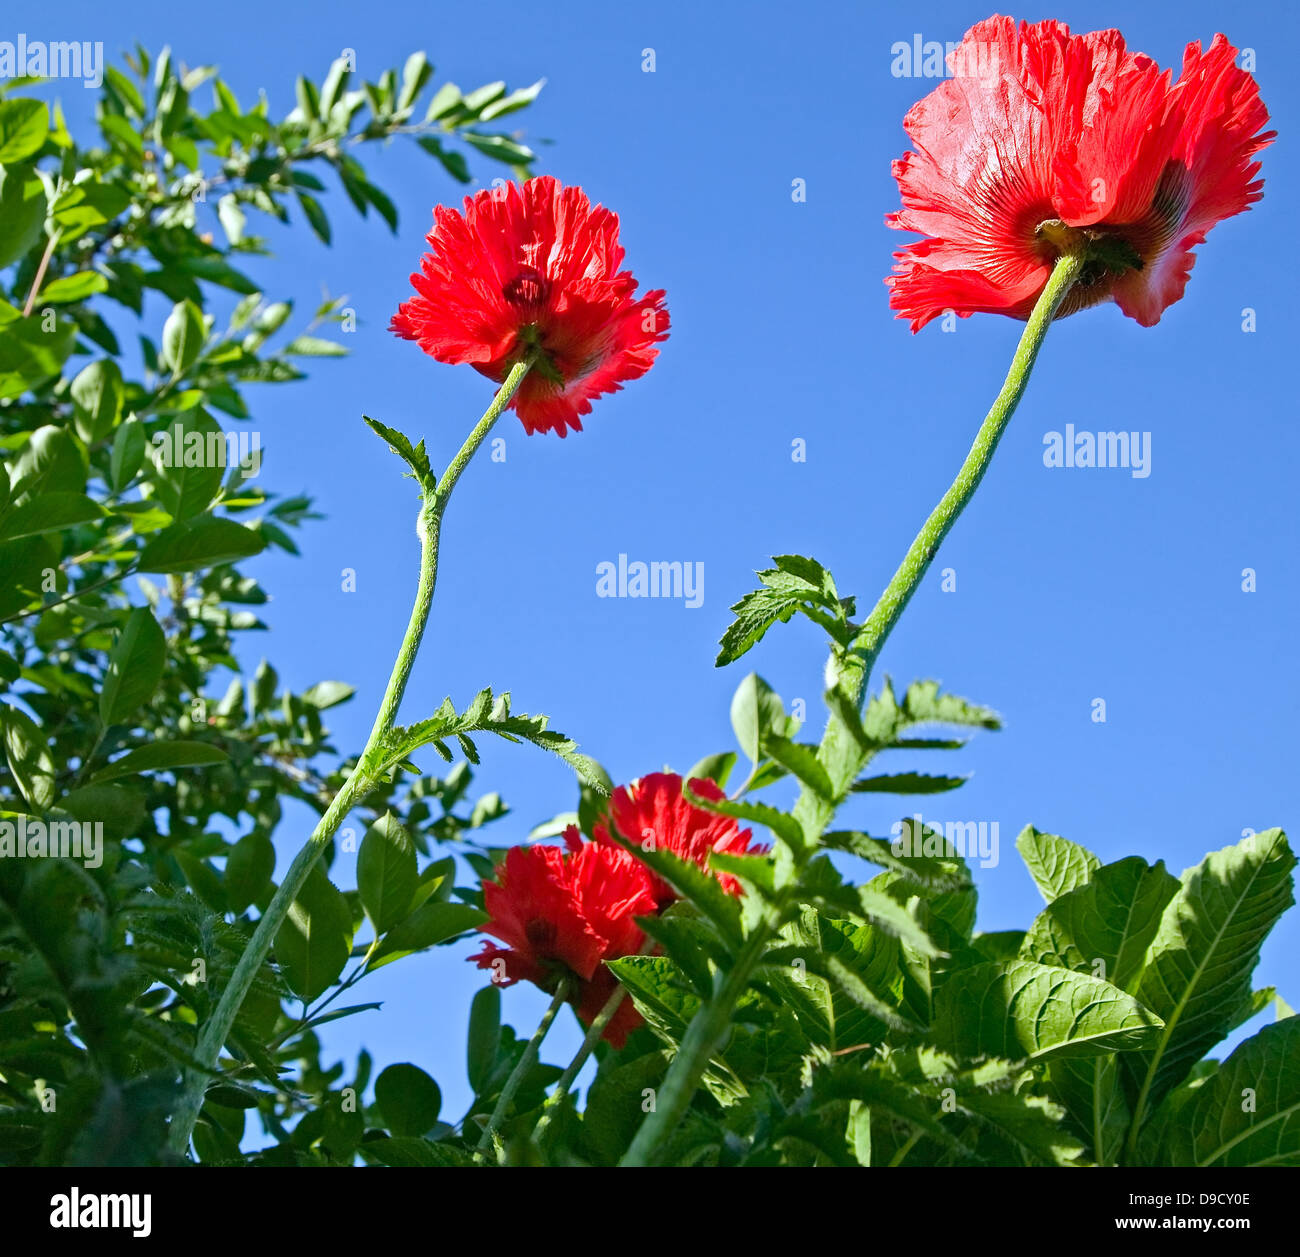 The red flower on blue skye background Stock Photo